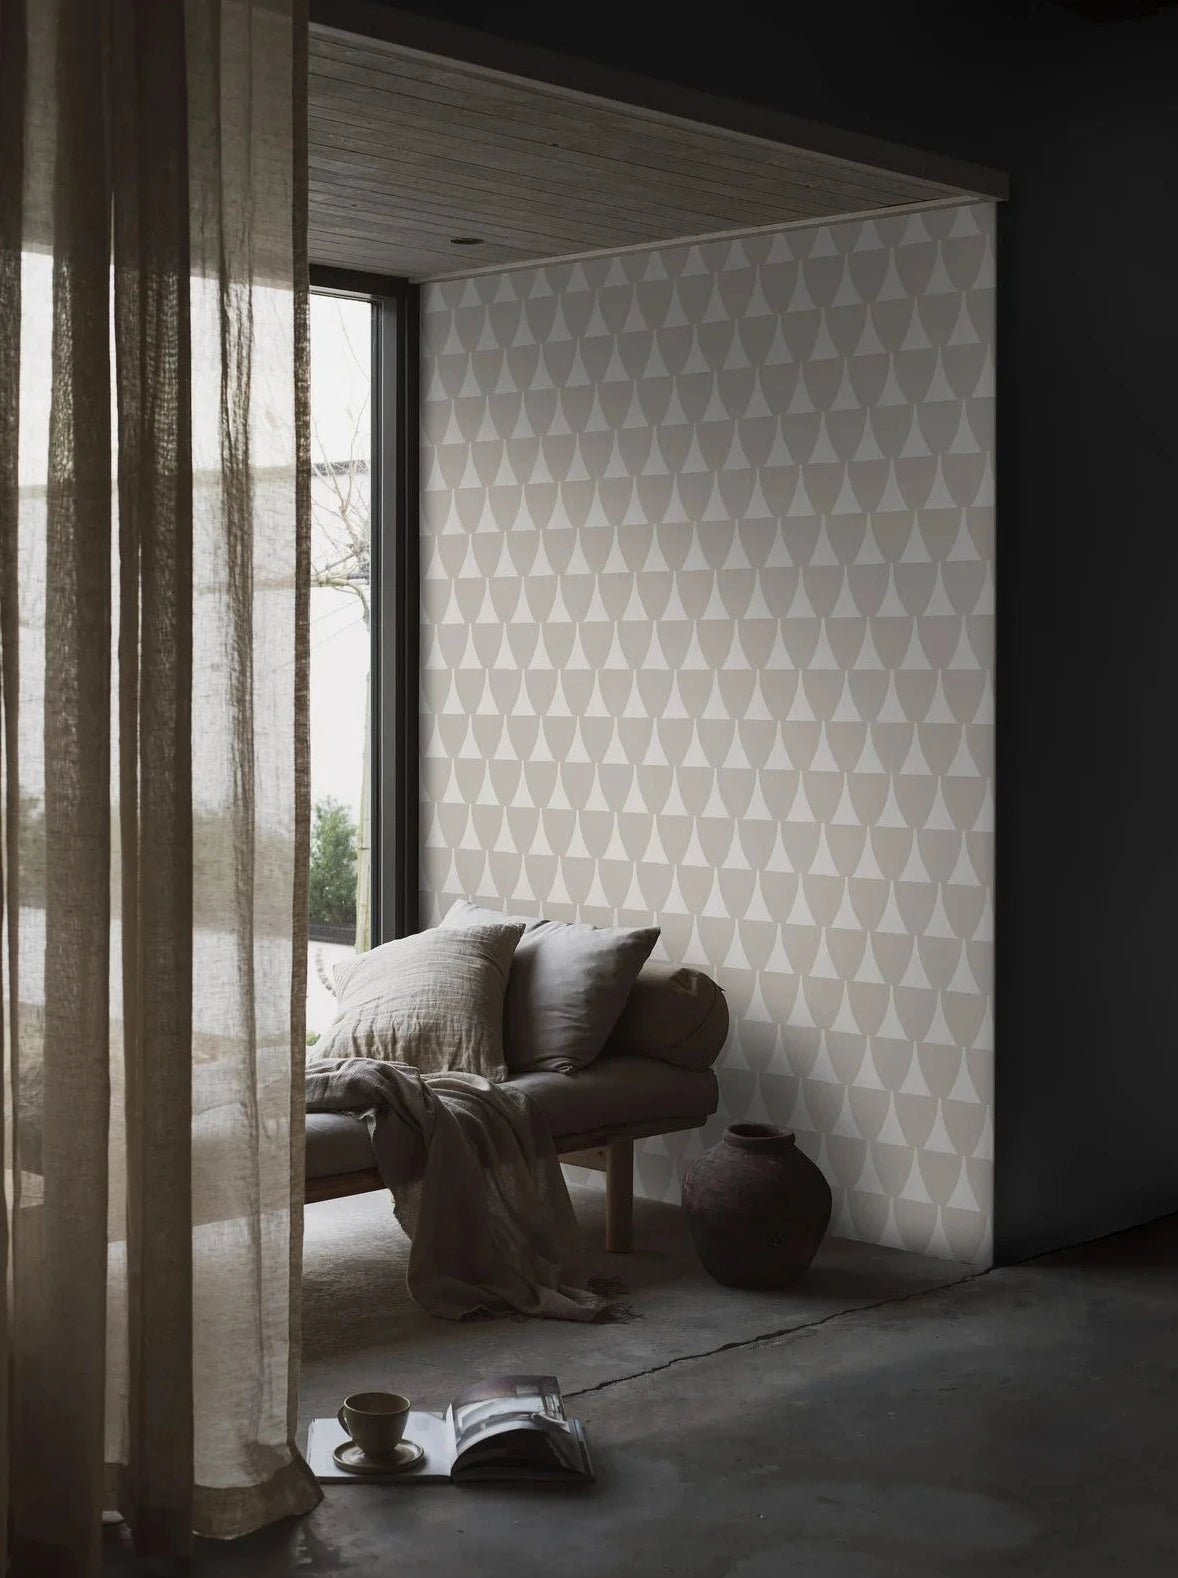 This wallpaper has a textile structured look and gives every home a quirky yet sophisticated vibe.